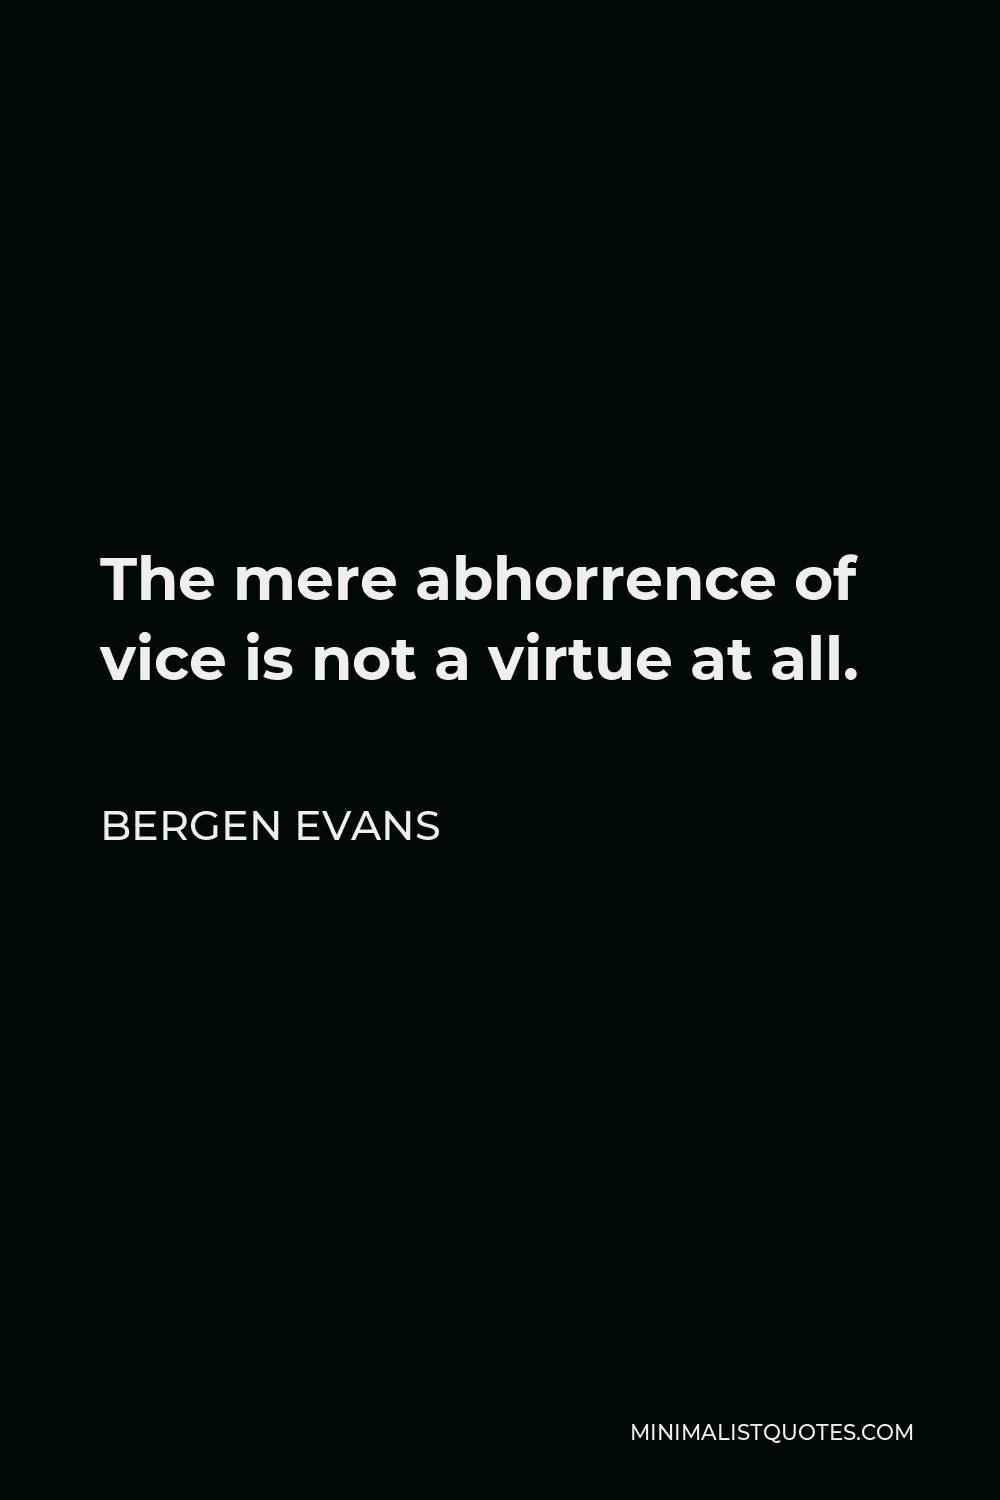 Bergen Evans Quote - The mere abhorrence of vice is not a virtue at all.